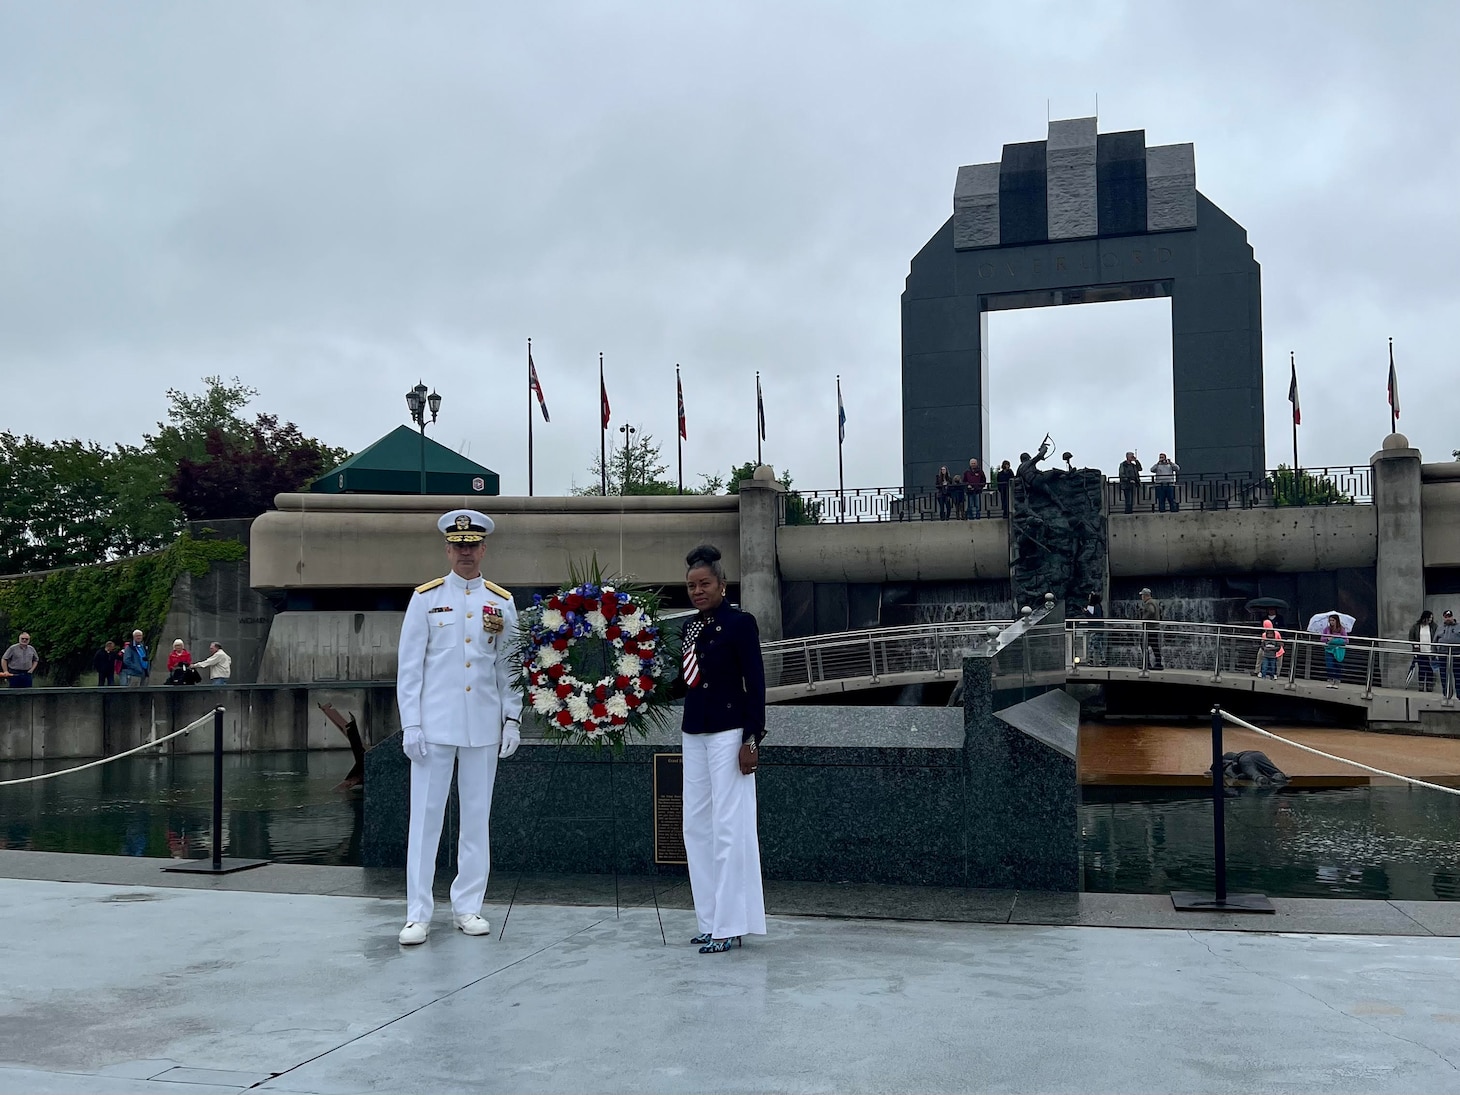 Rear Adm. Michael Steffen, Commander, Navy Reserve Forces Command, returned to his hometown to serve as the keynote speaker at the National D-Day Memorial’s observance event for Memorial Day, May 29, where hundreds of people gathered to honor and remember the men and women who died while serving in the U.S. military.